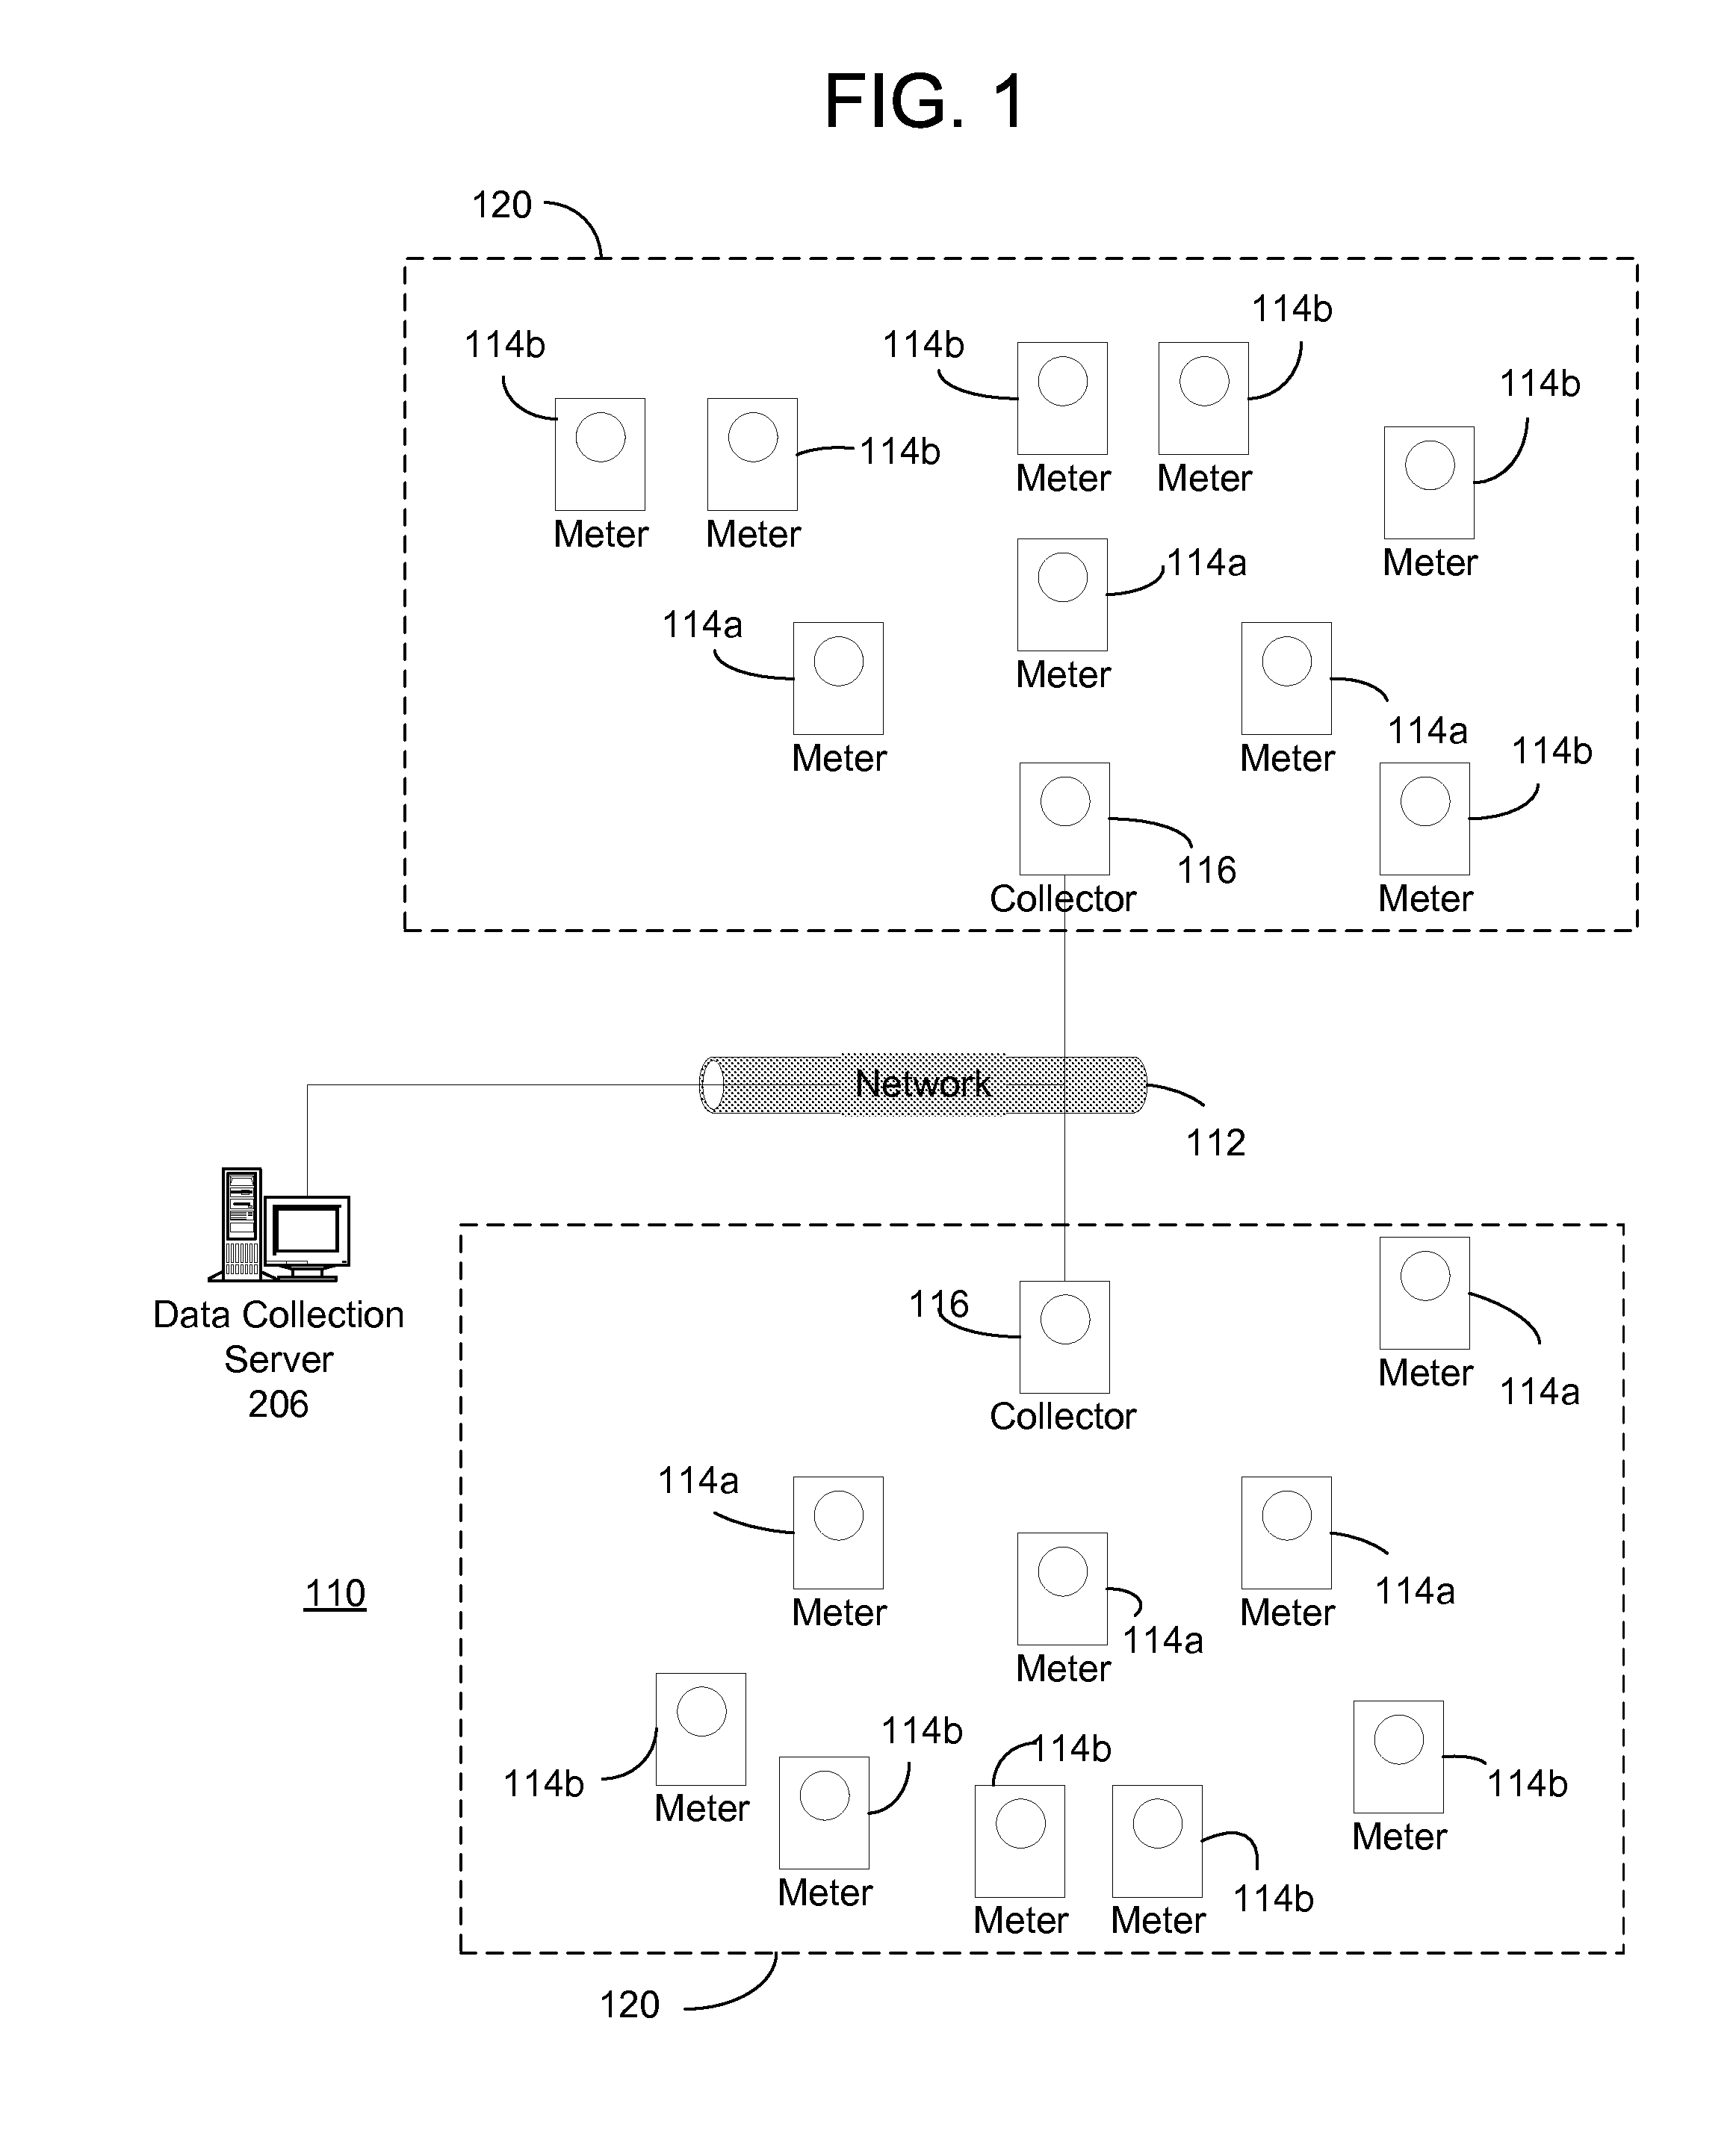 Wireless network communication nodes with opt out capability